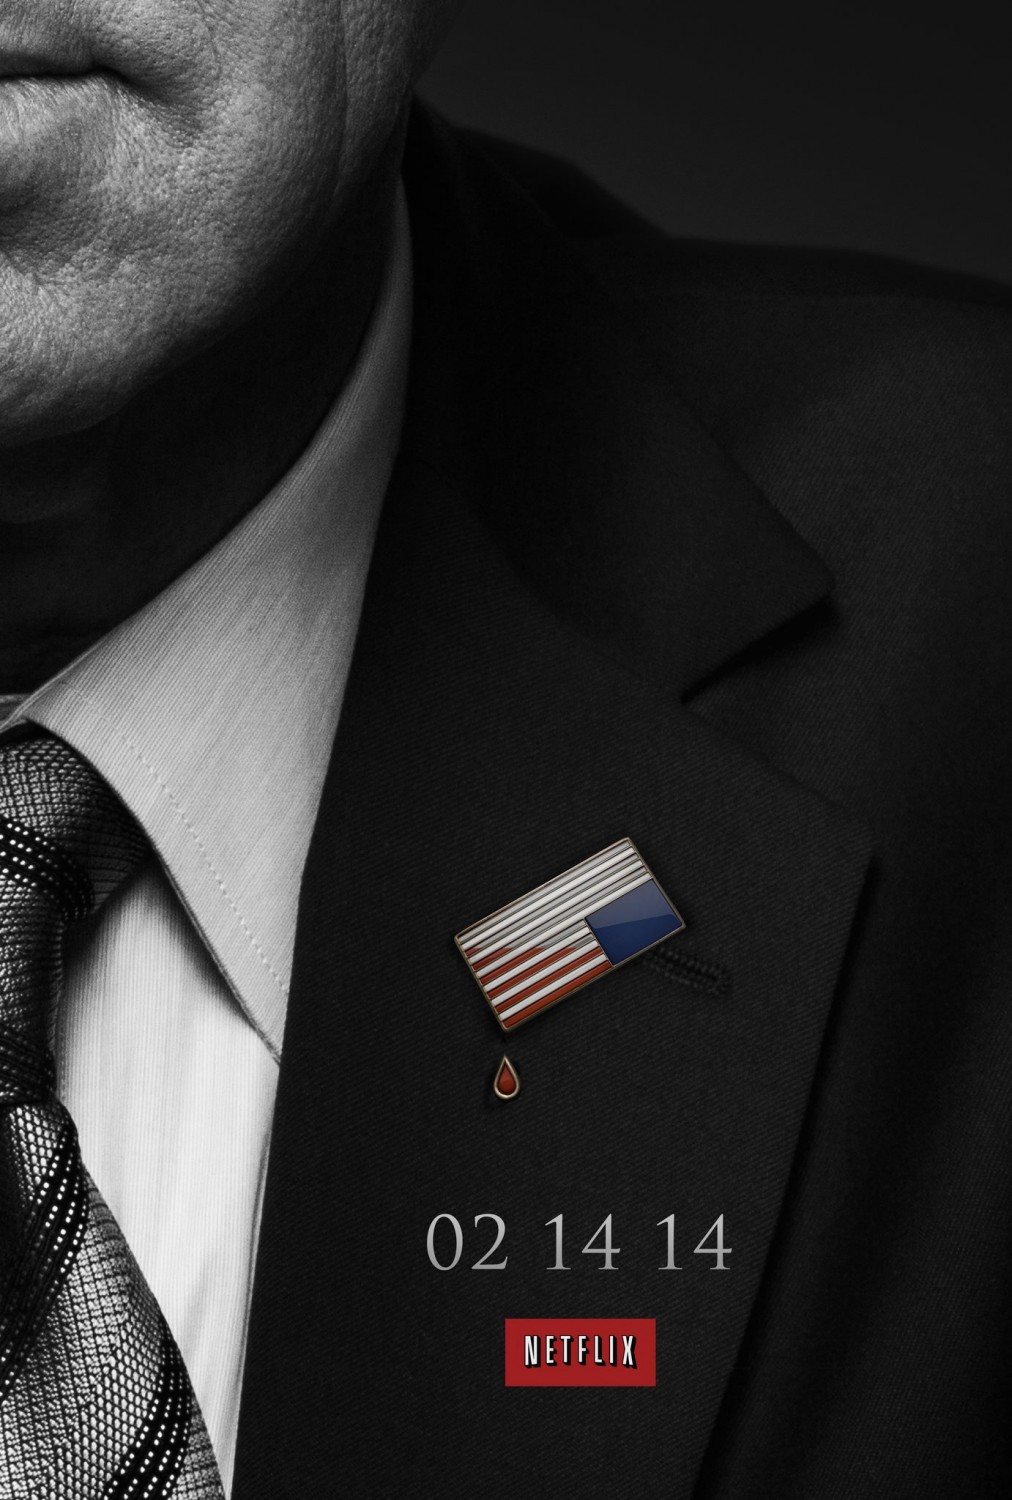 Extra Large TV Poster Image for House of Cards (#3 of 10)